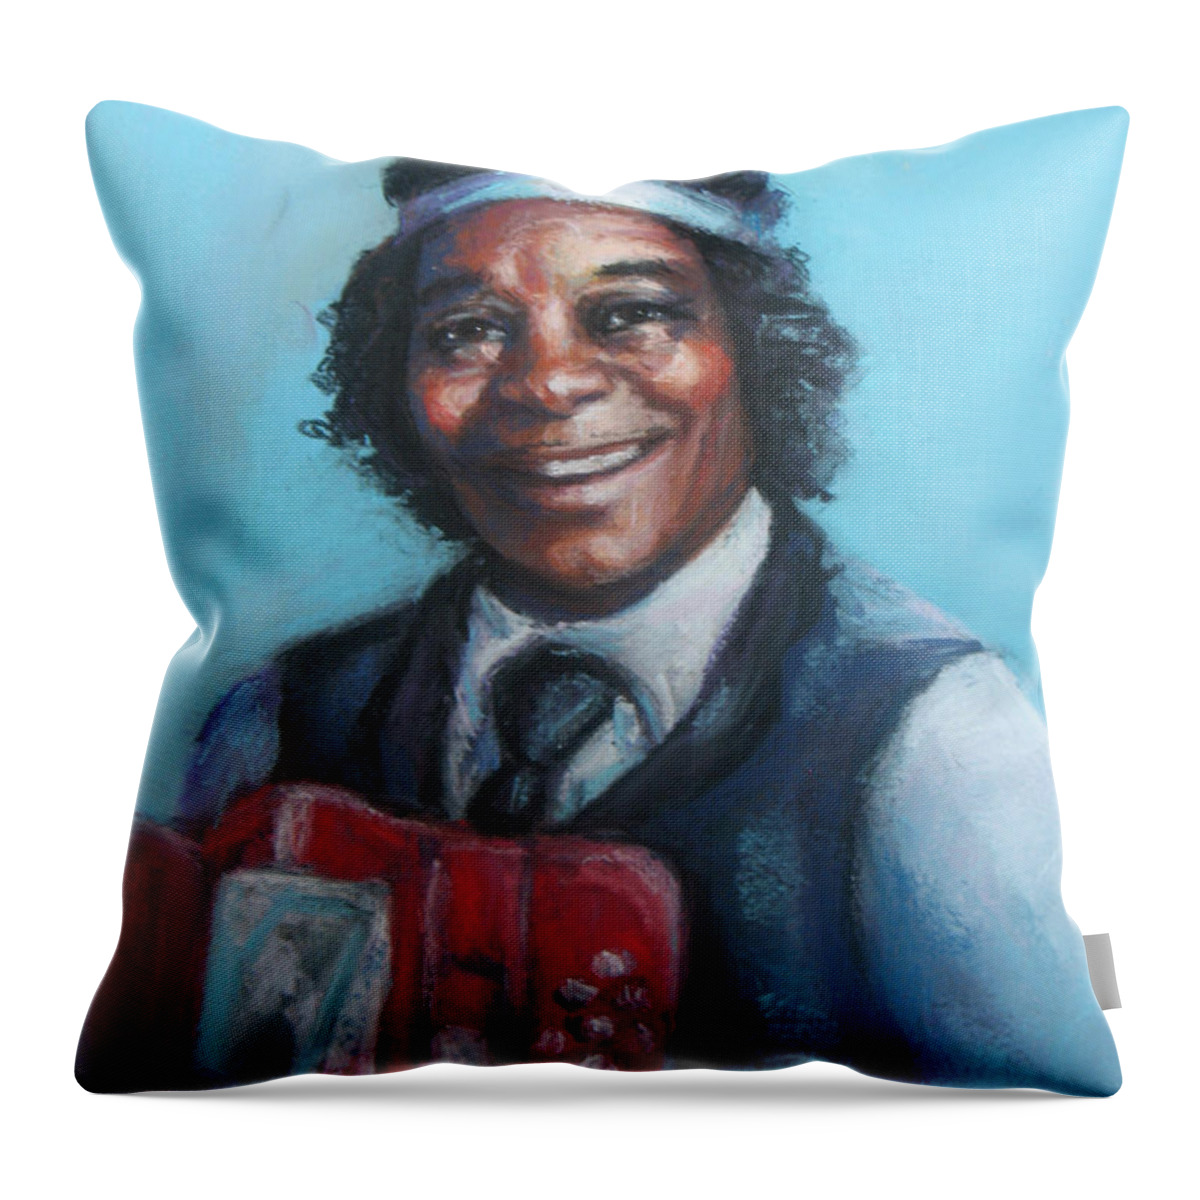 Pastel Throw Pillow featuring the painting Rockin Dopsie Senior by Beverly Boulet